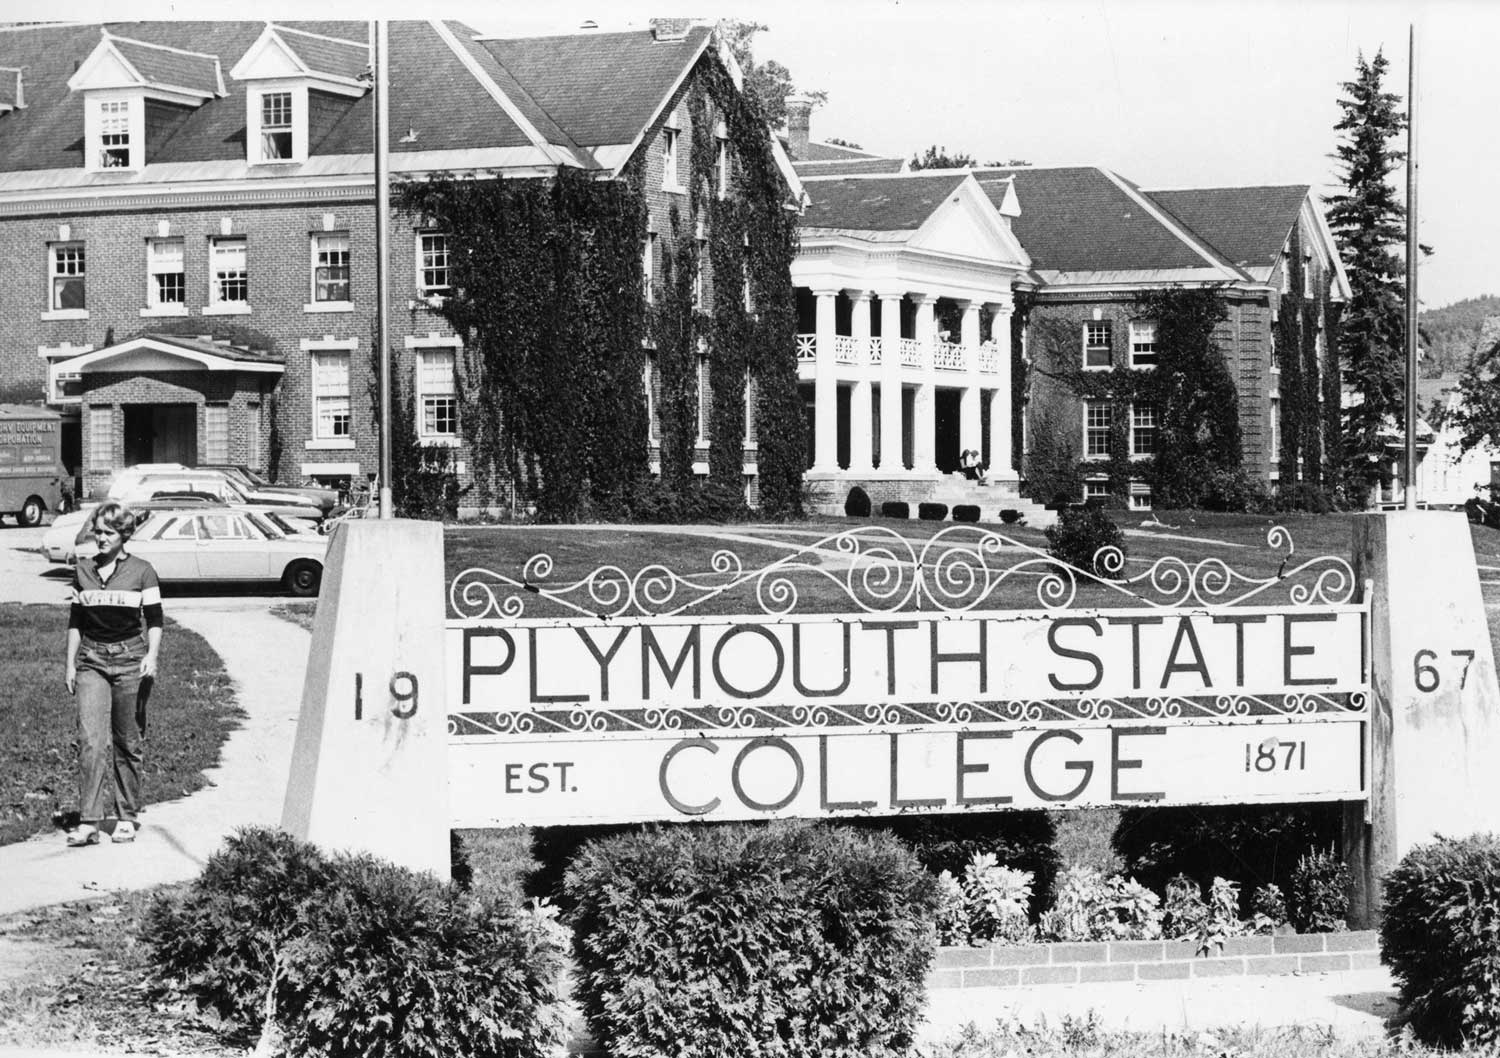 Plymouth State College in 1967